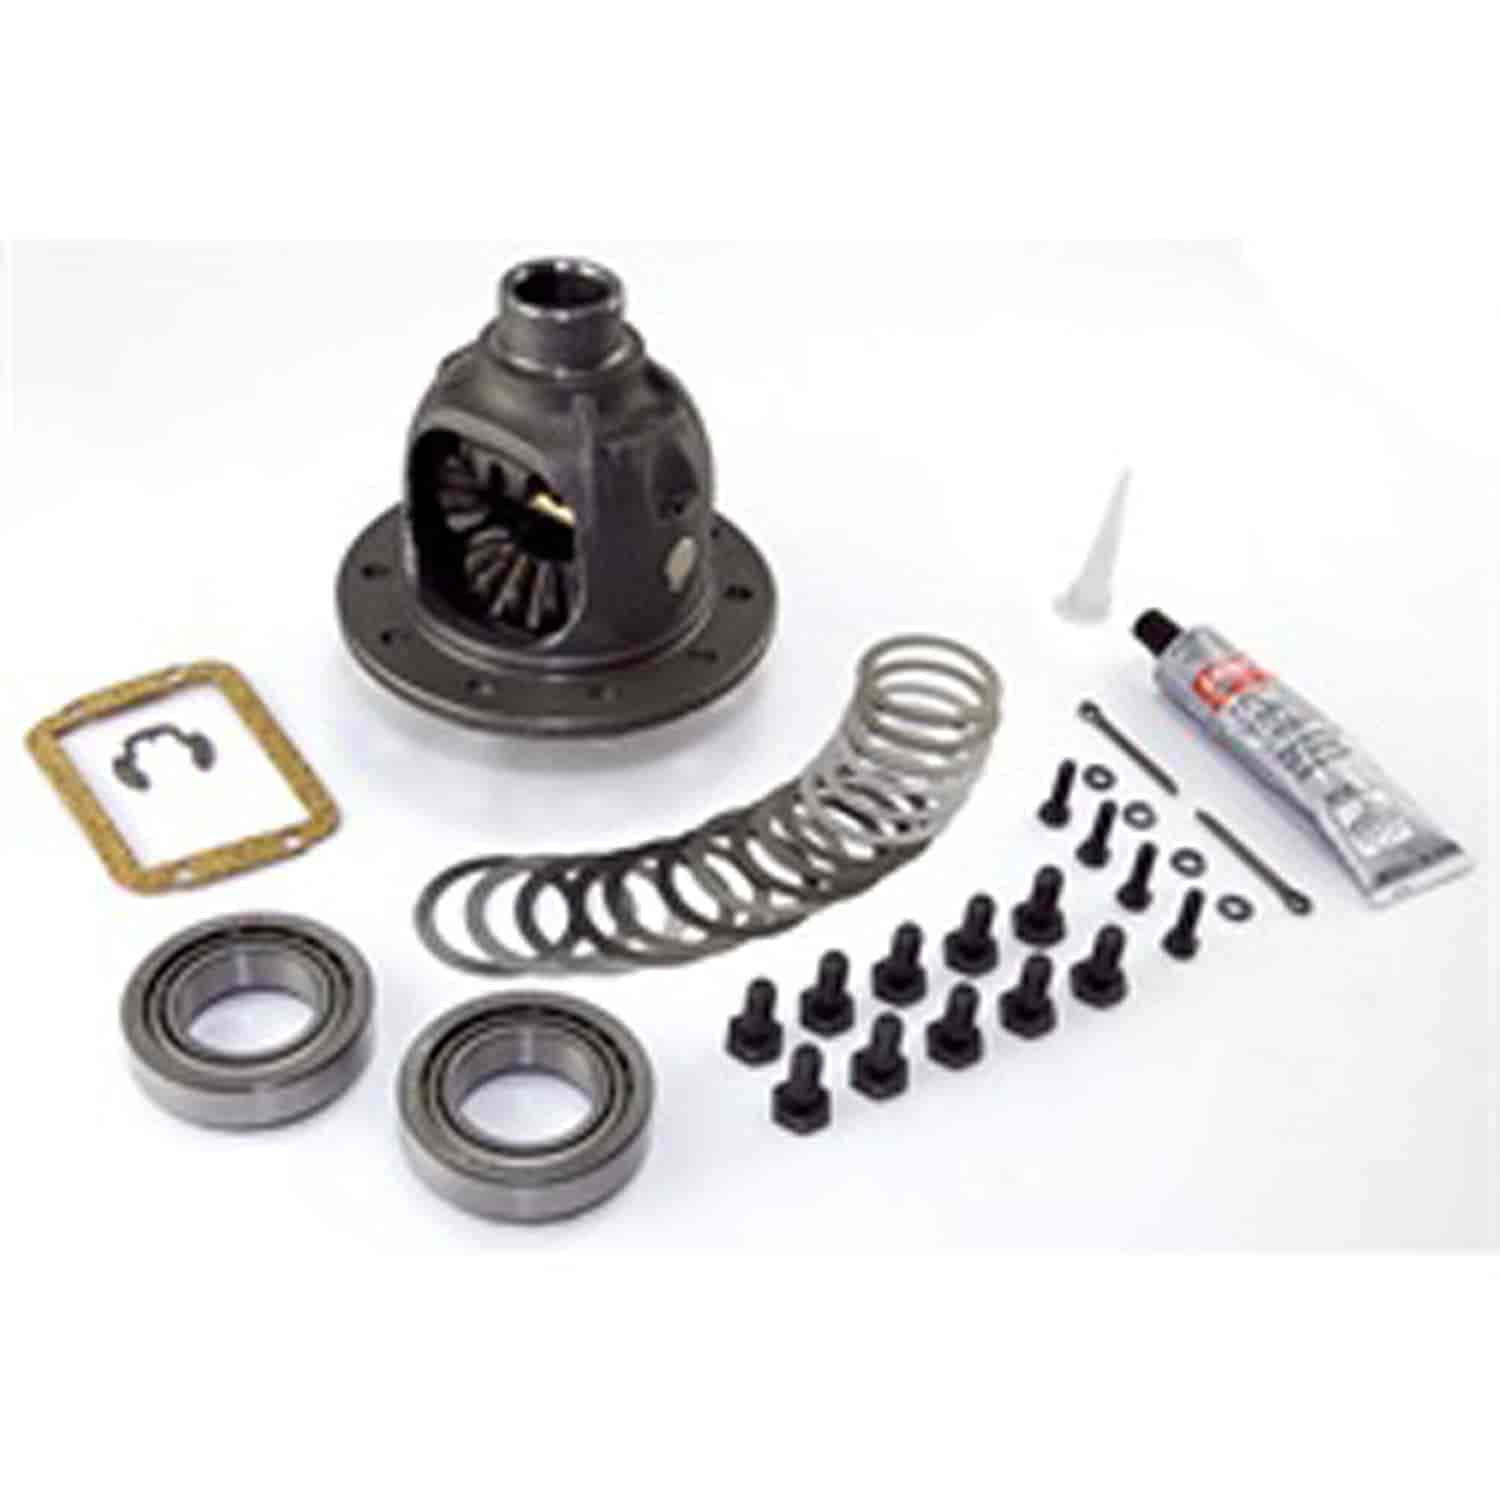 This standard differential case assembly kit from Omix-ADA is for Dana 30 w/ Disconnect 3.73 to 4.10 Ratio